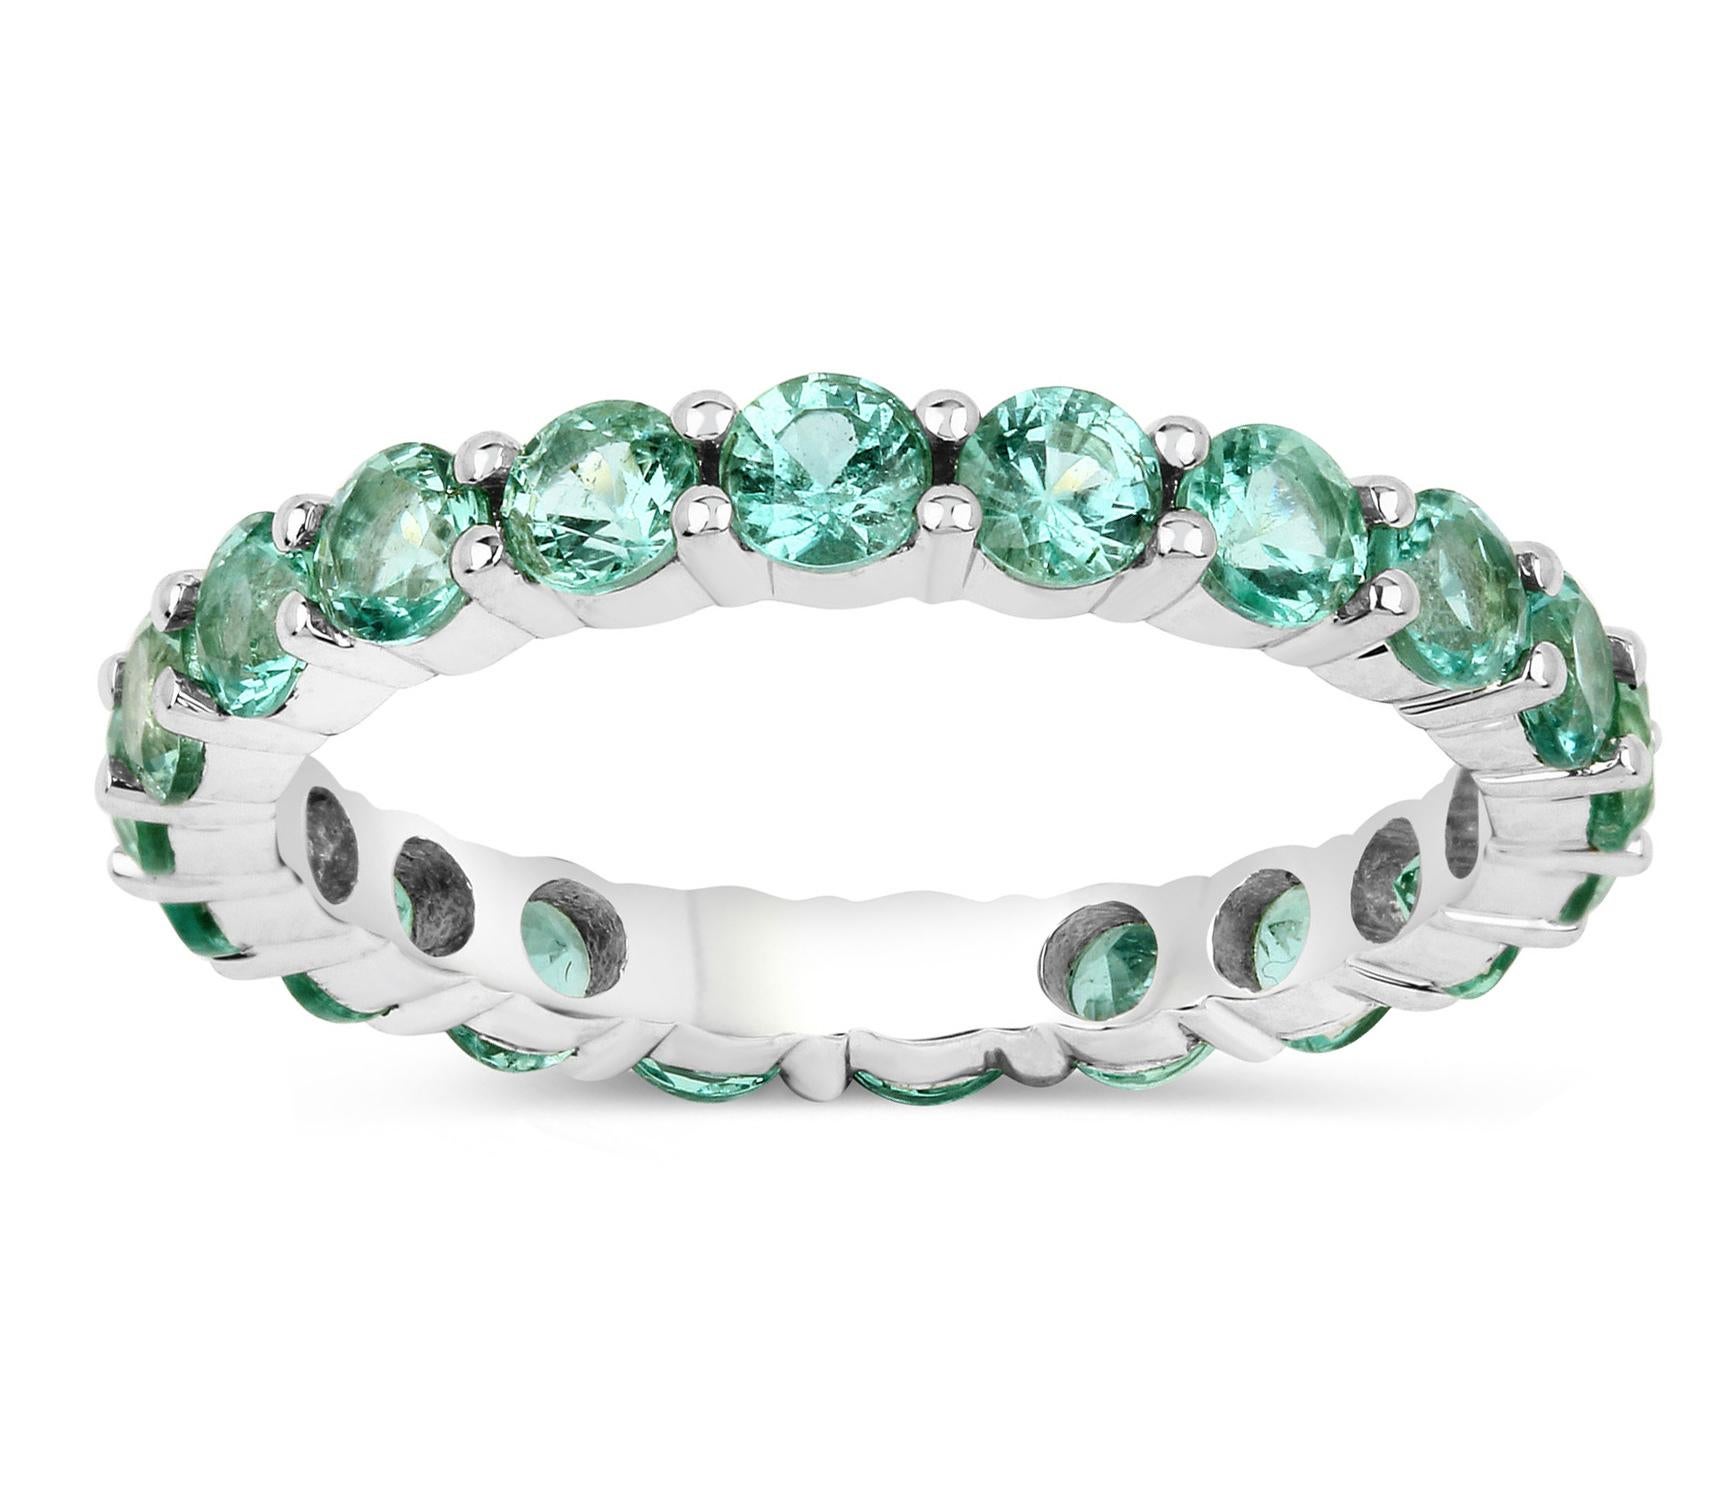 Zambian Emerald Eternity Band 2 Carats 14k White Gold In Excellent Condition For Sale In Laguna Niguel, CA